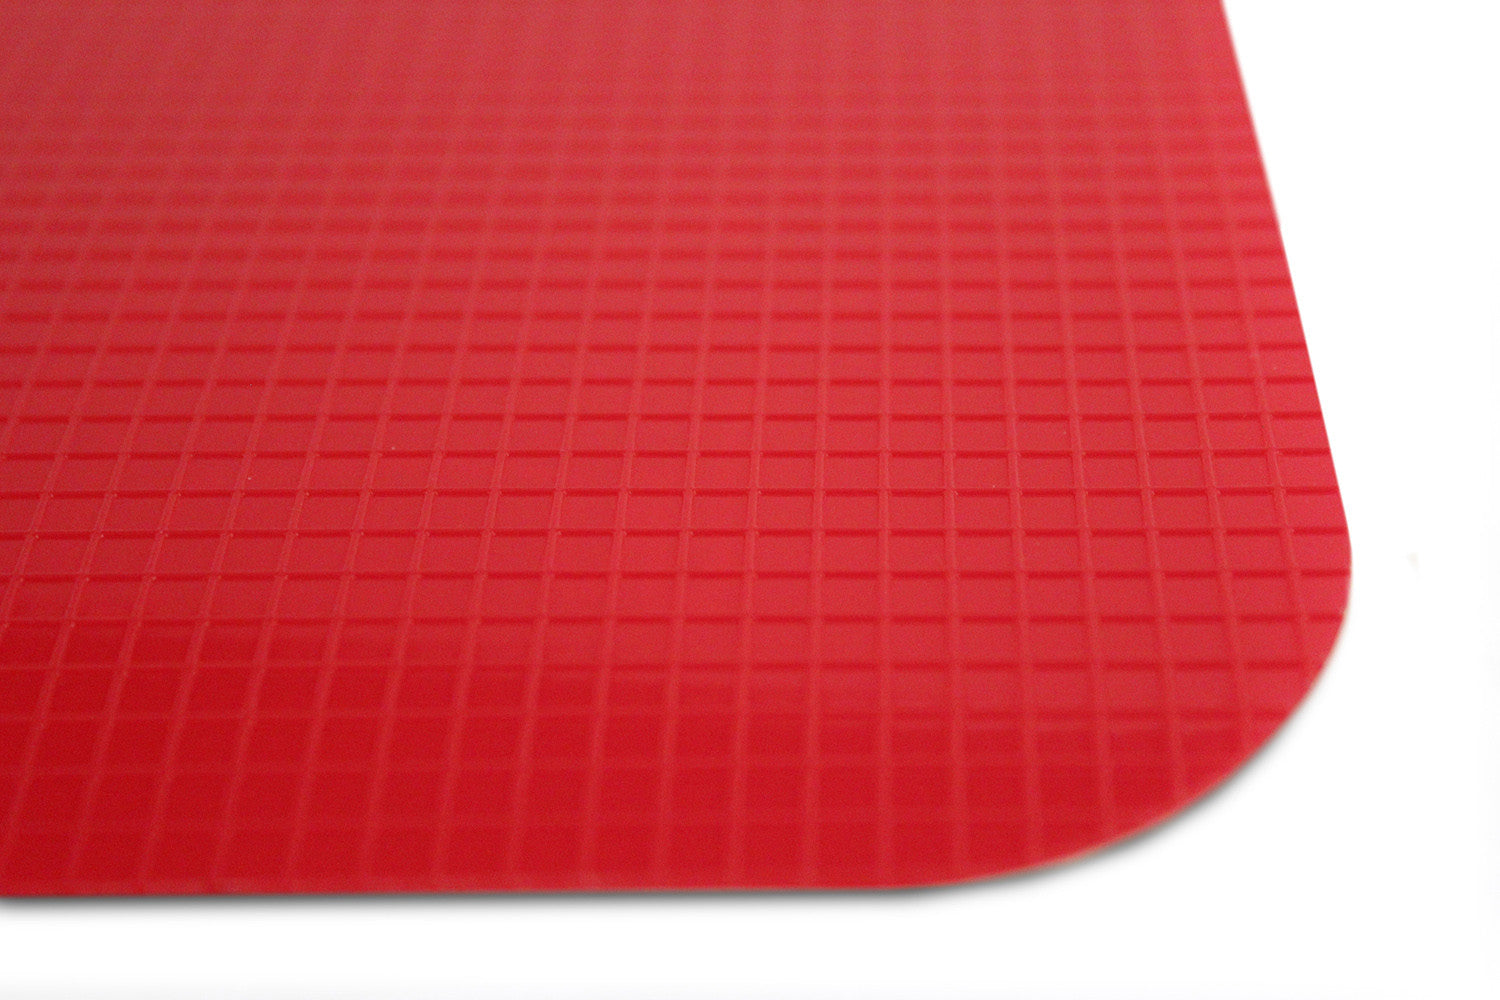 Neoflam Flexible Cutting Mats with Non-Slip Grip Set of 4, Multicolor